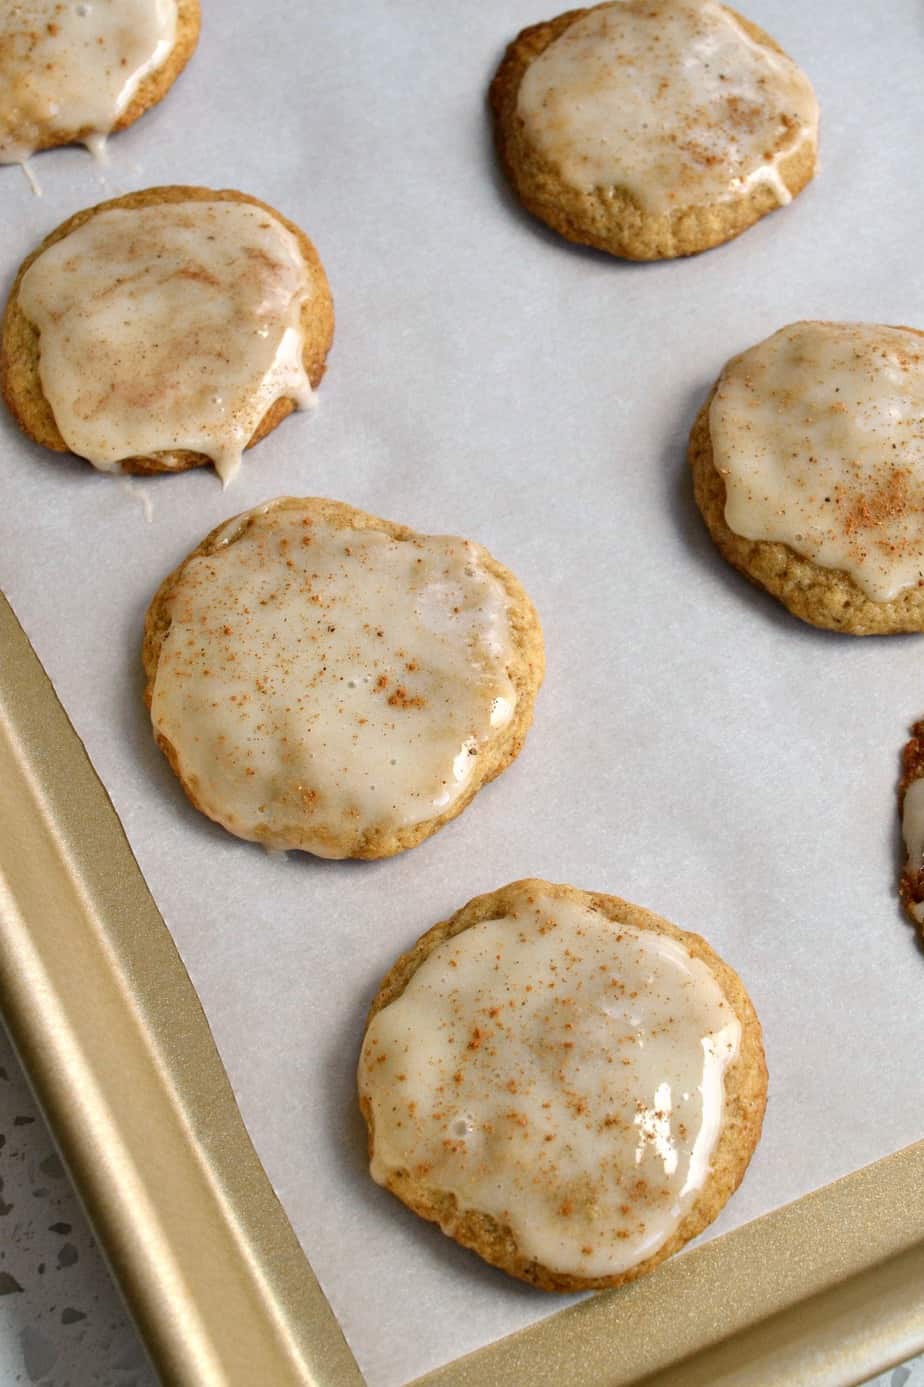 You are going to love these easy Eggnog Cookies topped with a light eggnog glaze and a sprinkling of nutmeg and cinnamon. 